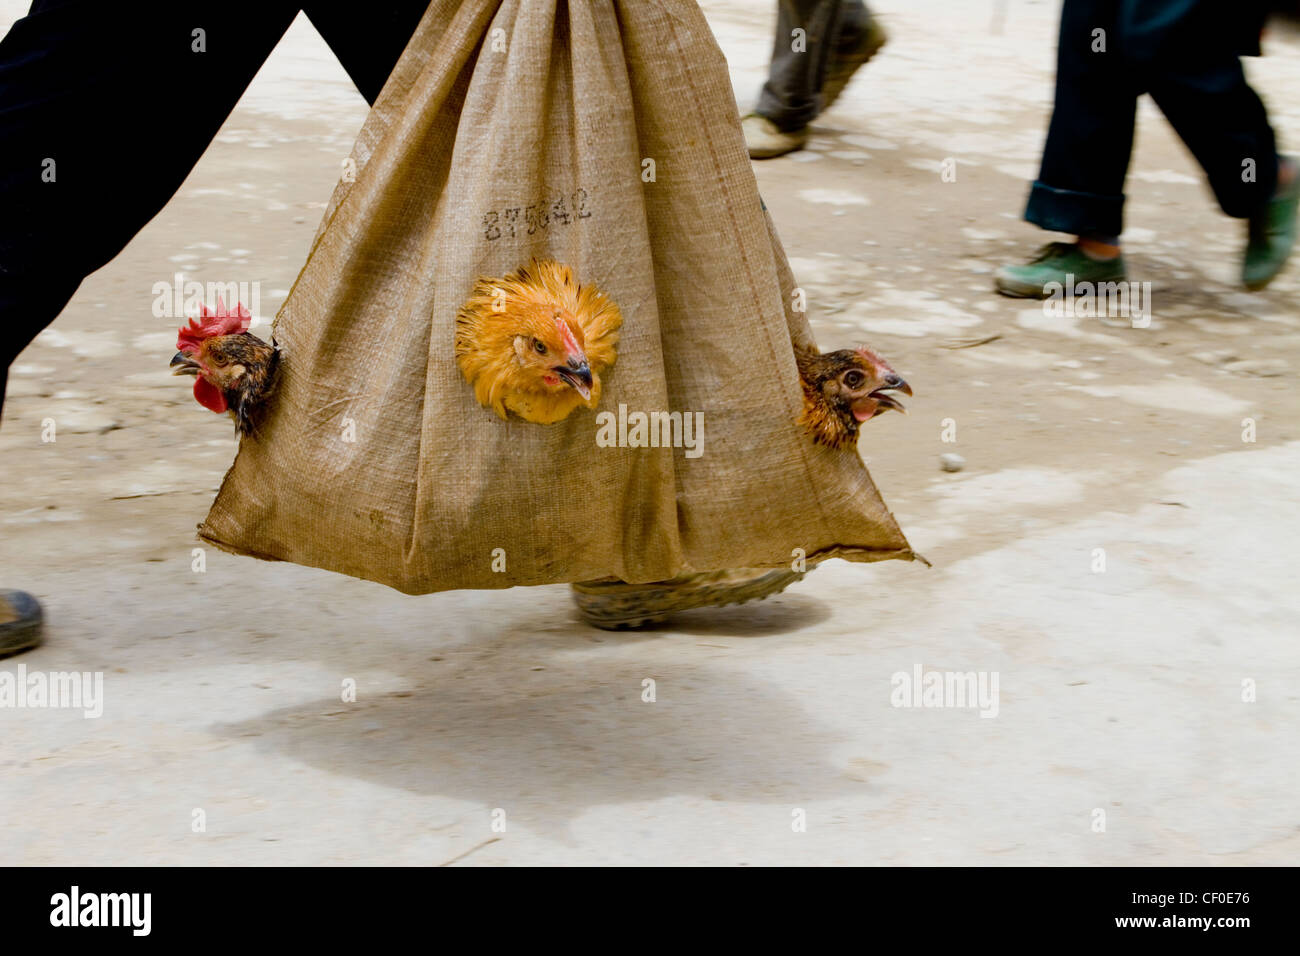 Man carrying chicken in jute bag to livestock market Yuanyang area China Asia Stock Photo